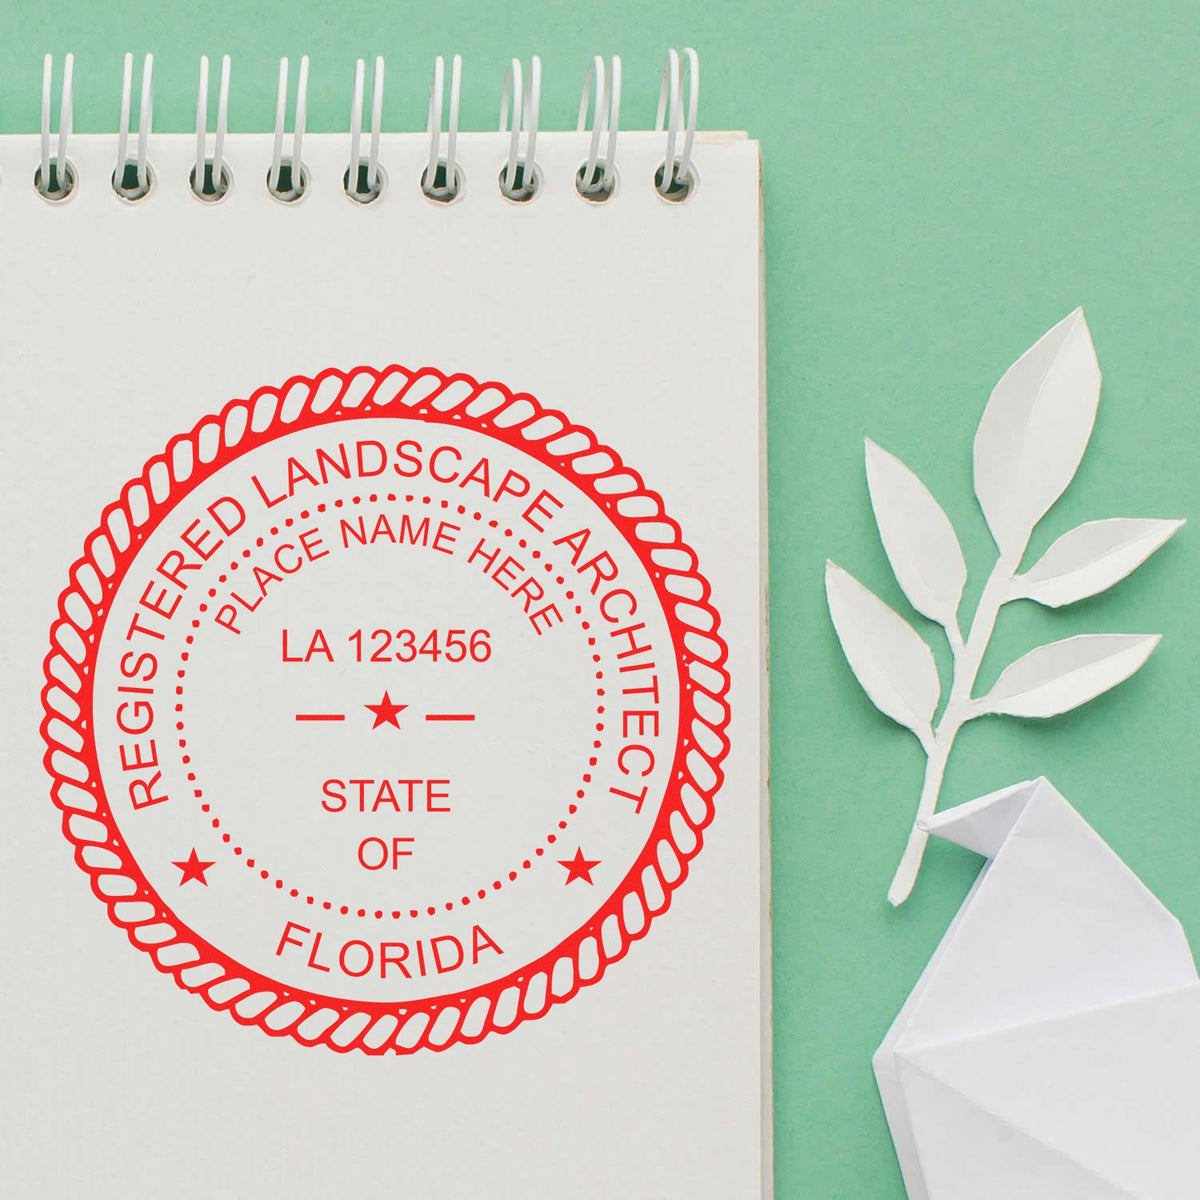 A photograph of the Digital Florida Landscape Architect Stamp stamp impression reveals a vivid, professional image of the on paper.